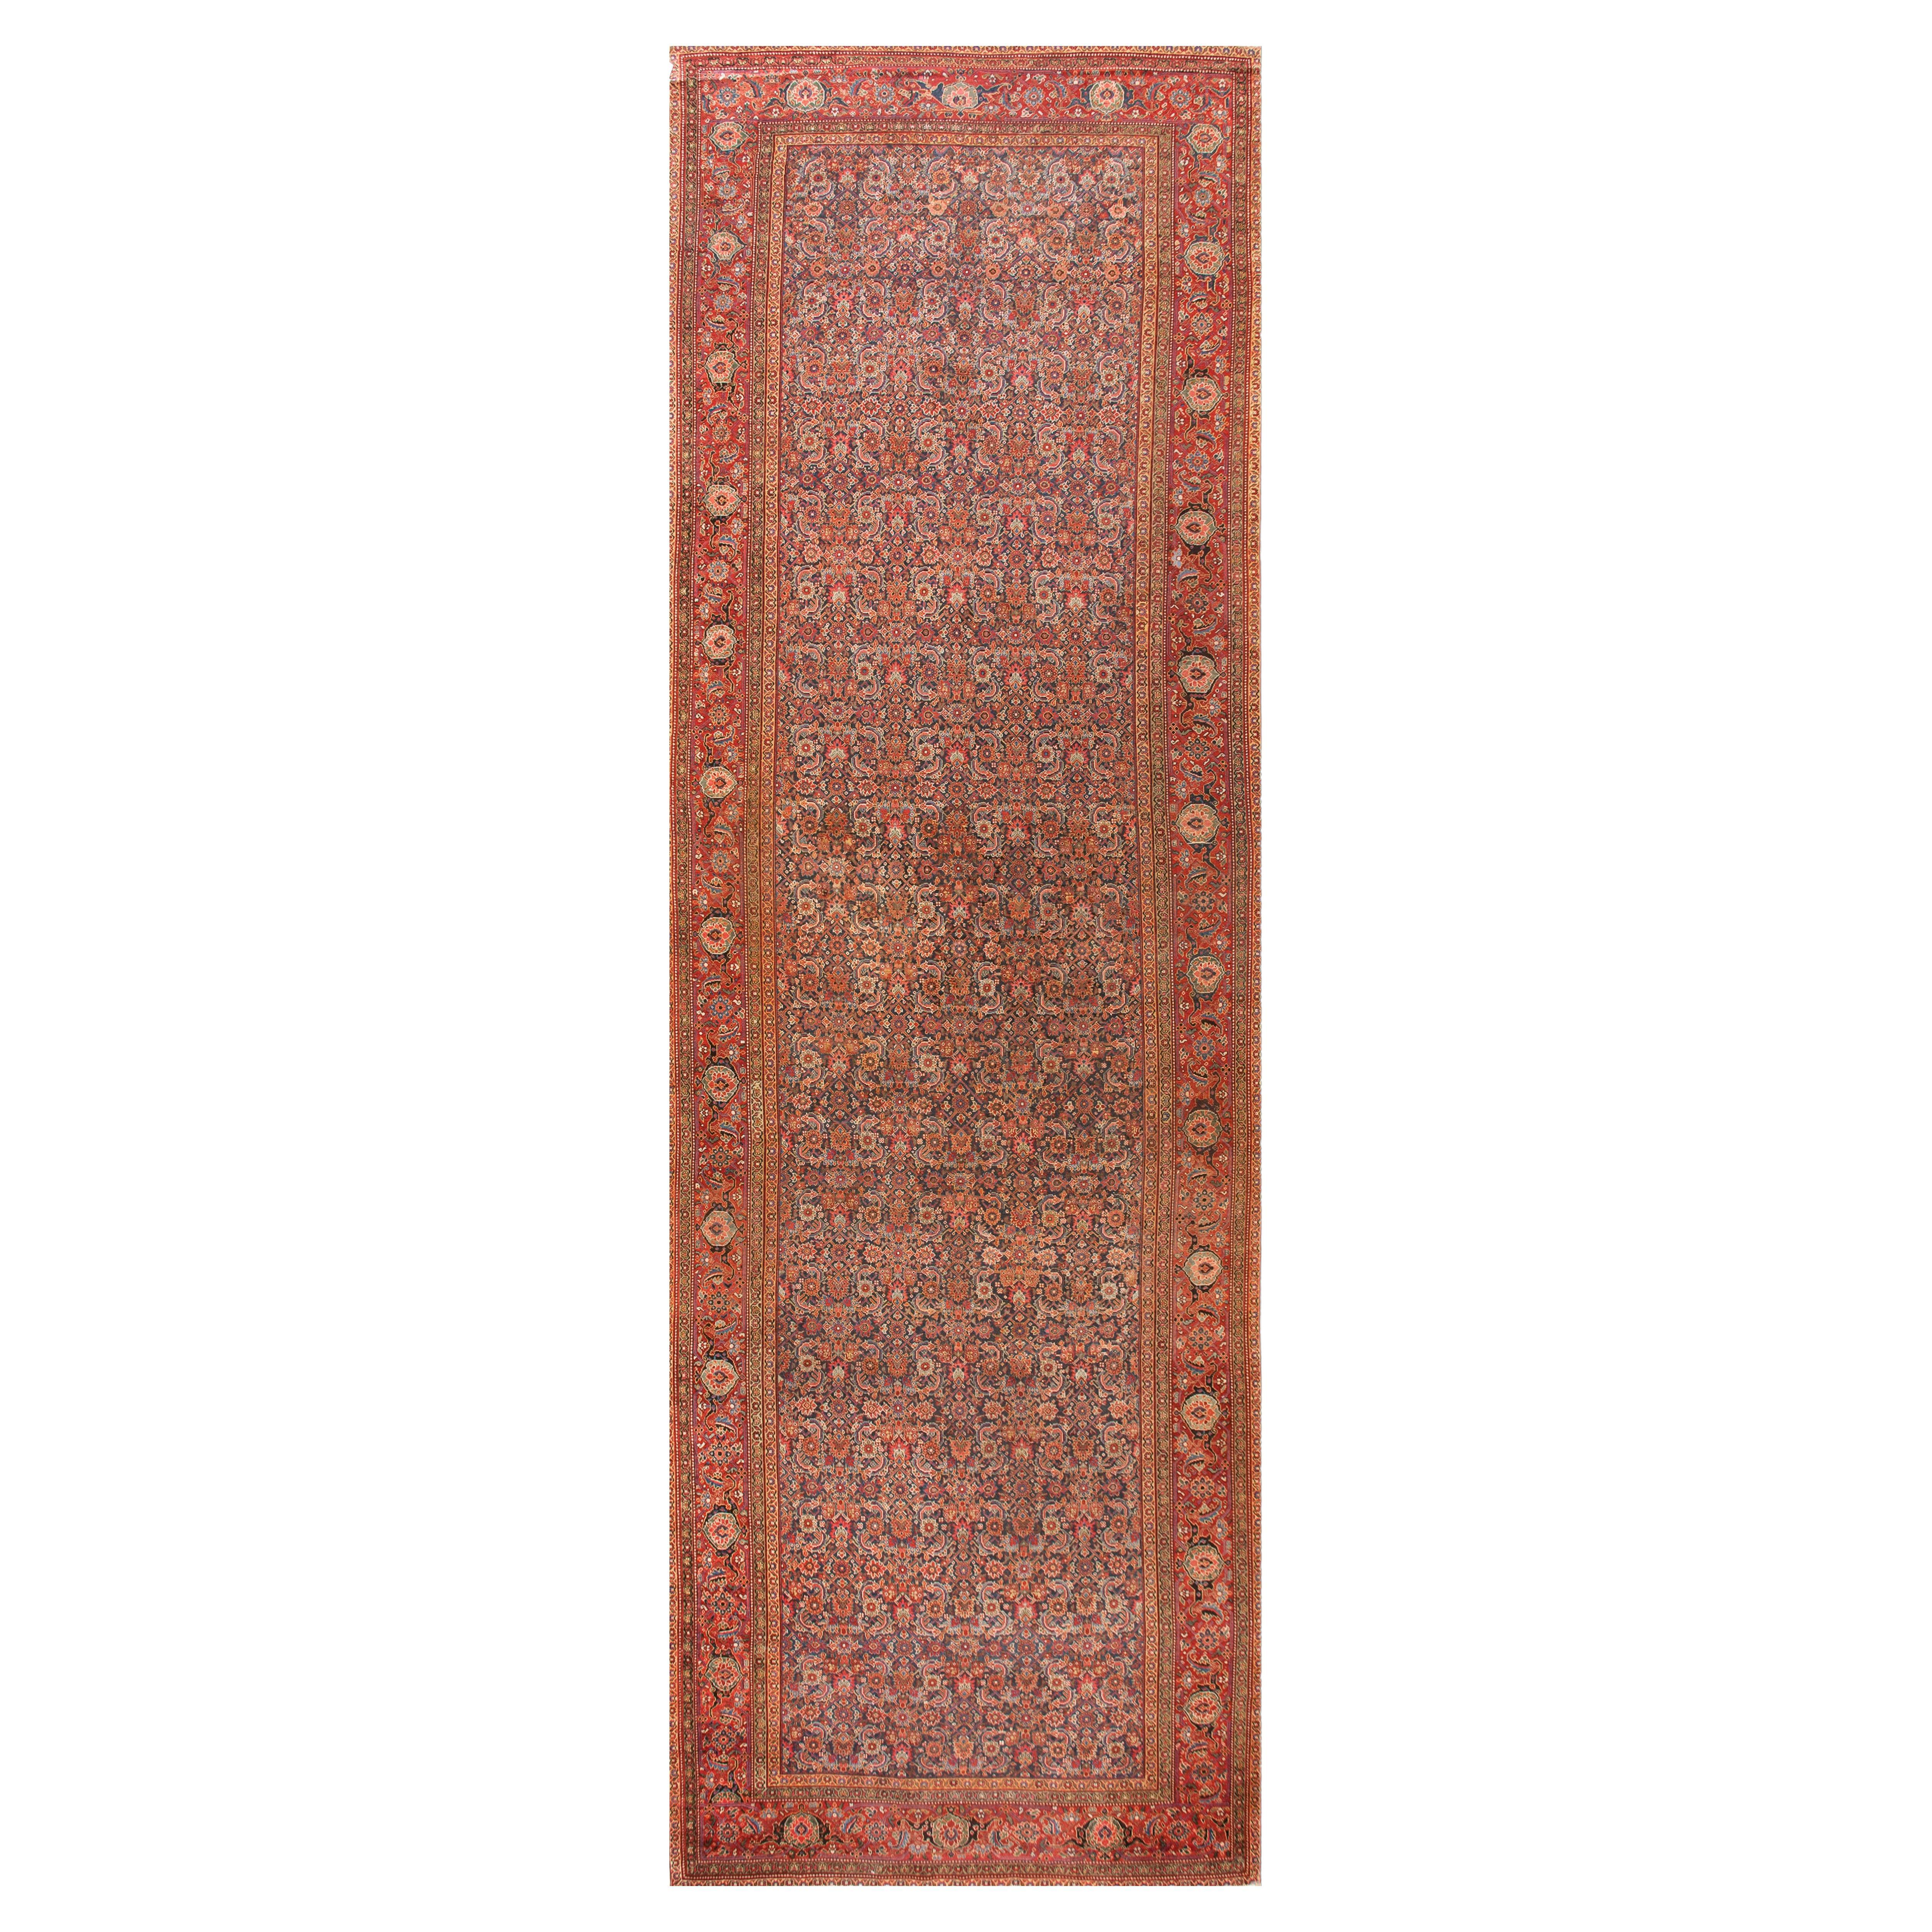 Mid 19th Century NW Persian Galley Carpet ( 7'8" x 22'10" - 234 x 696 ) For Sale